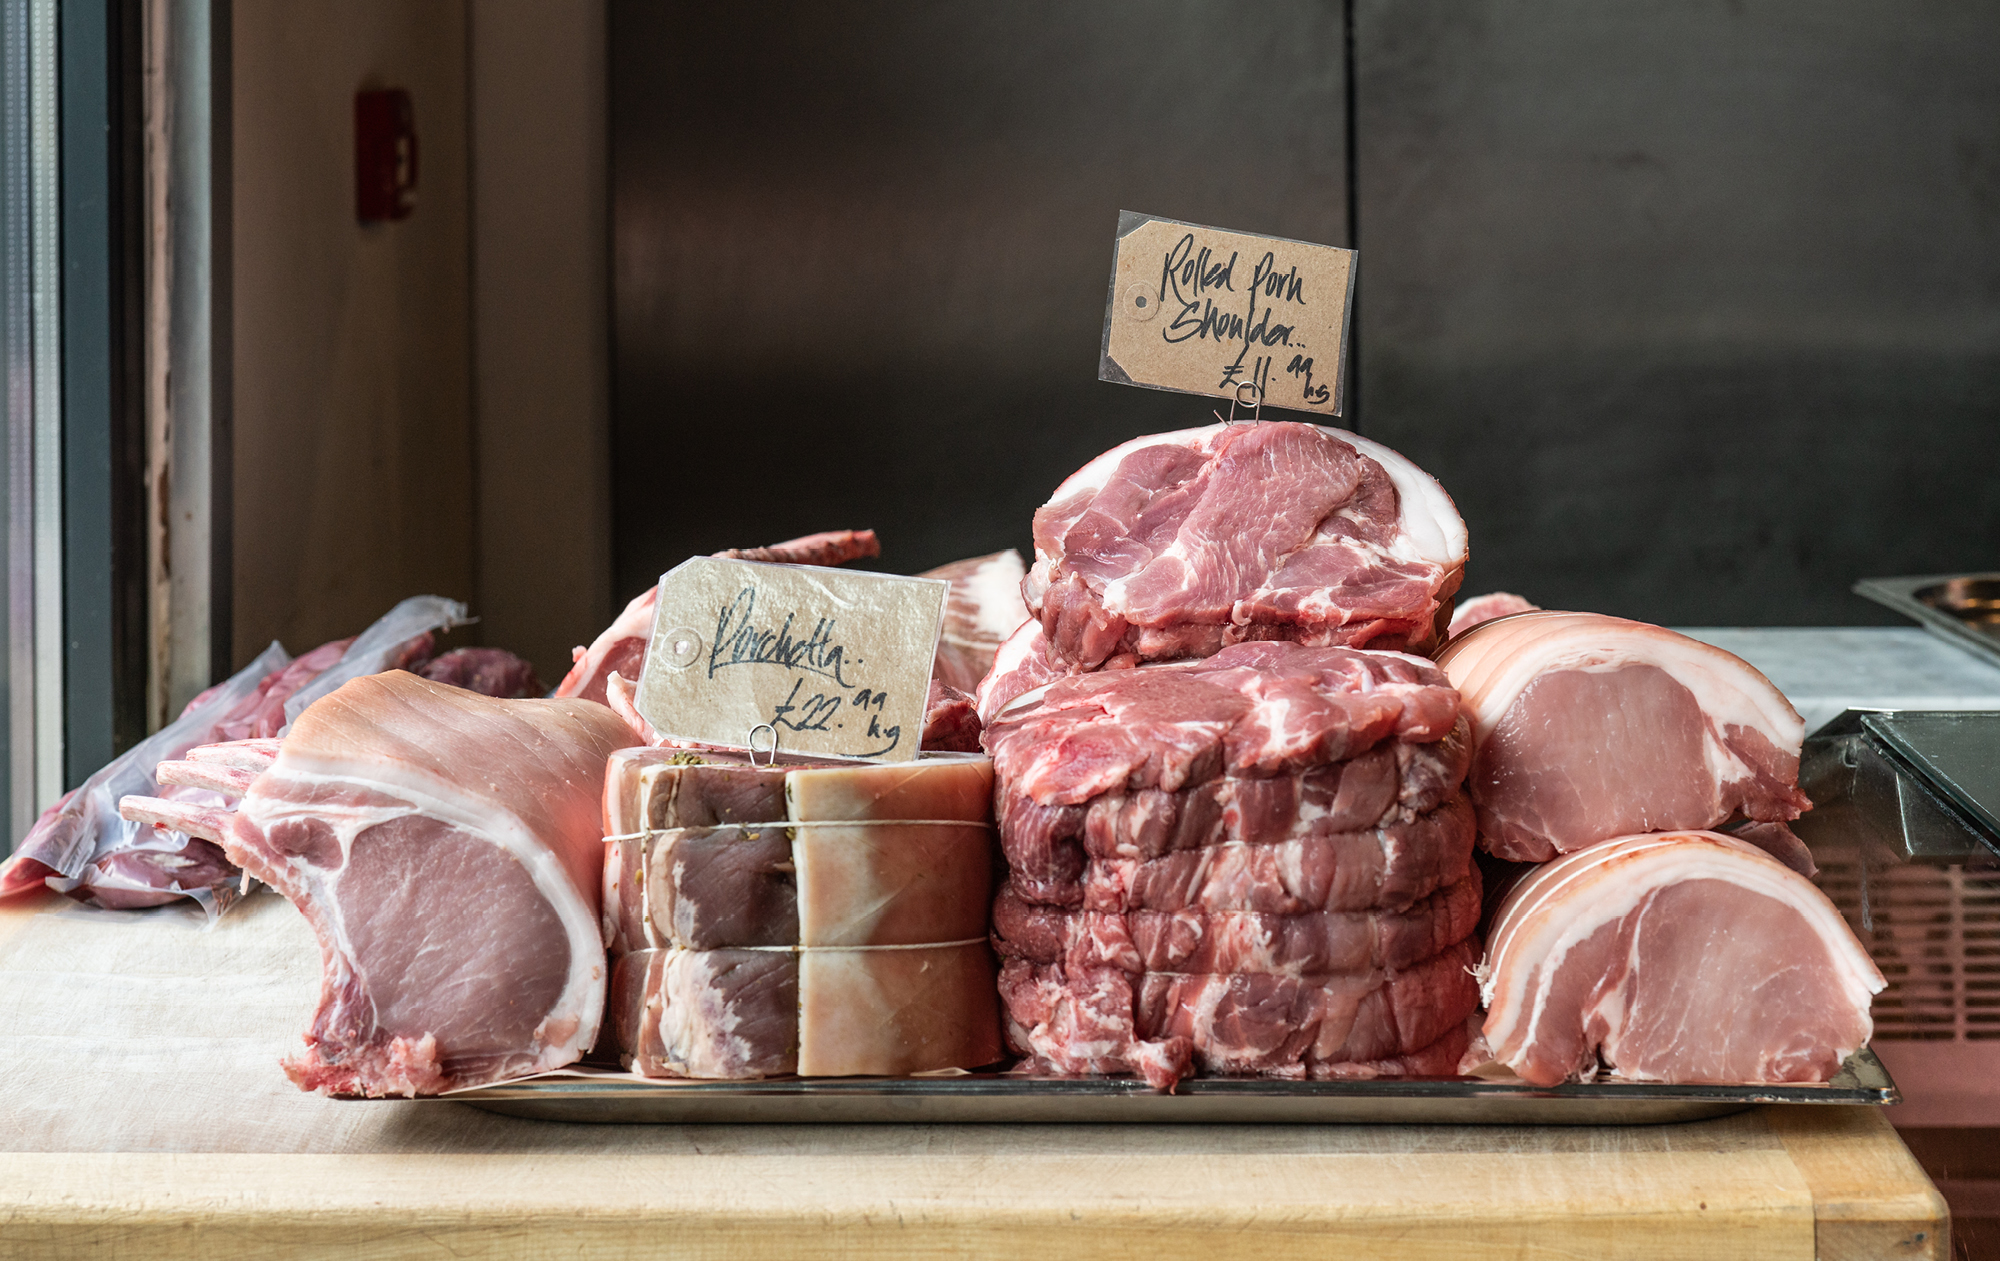 Provenance Village Butcher works with a carefully selection collection of smaller UK farms